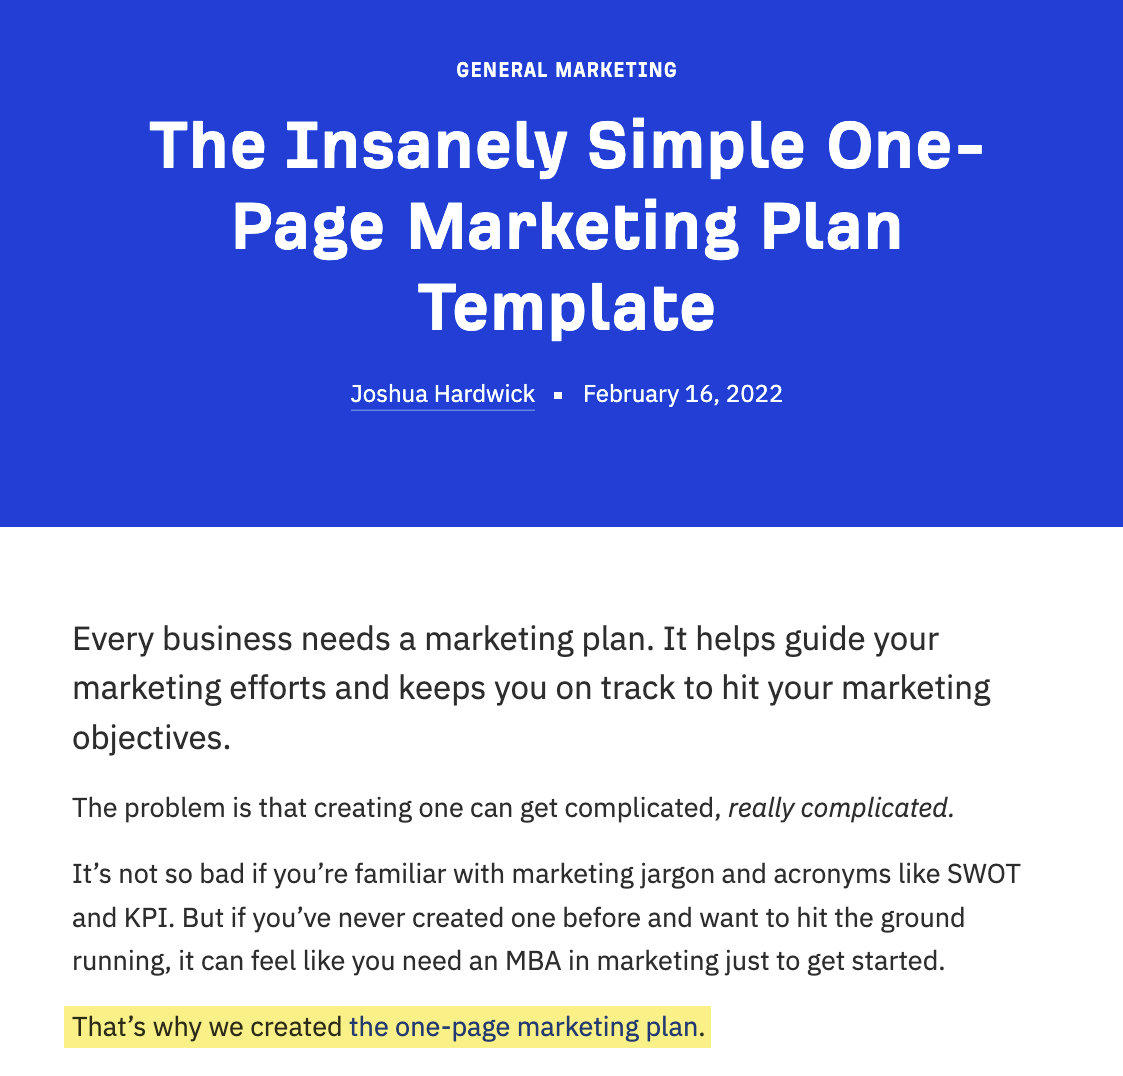 Excerpt of an Ahrefs article about a one-page marketing plan